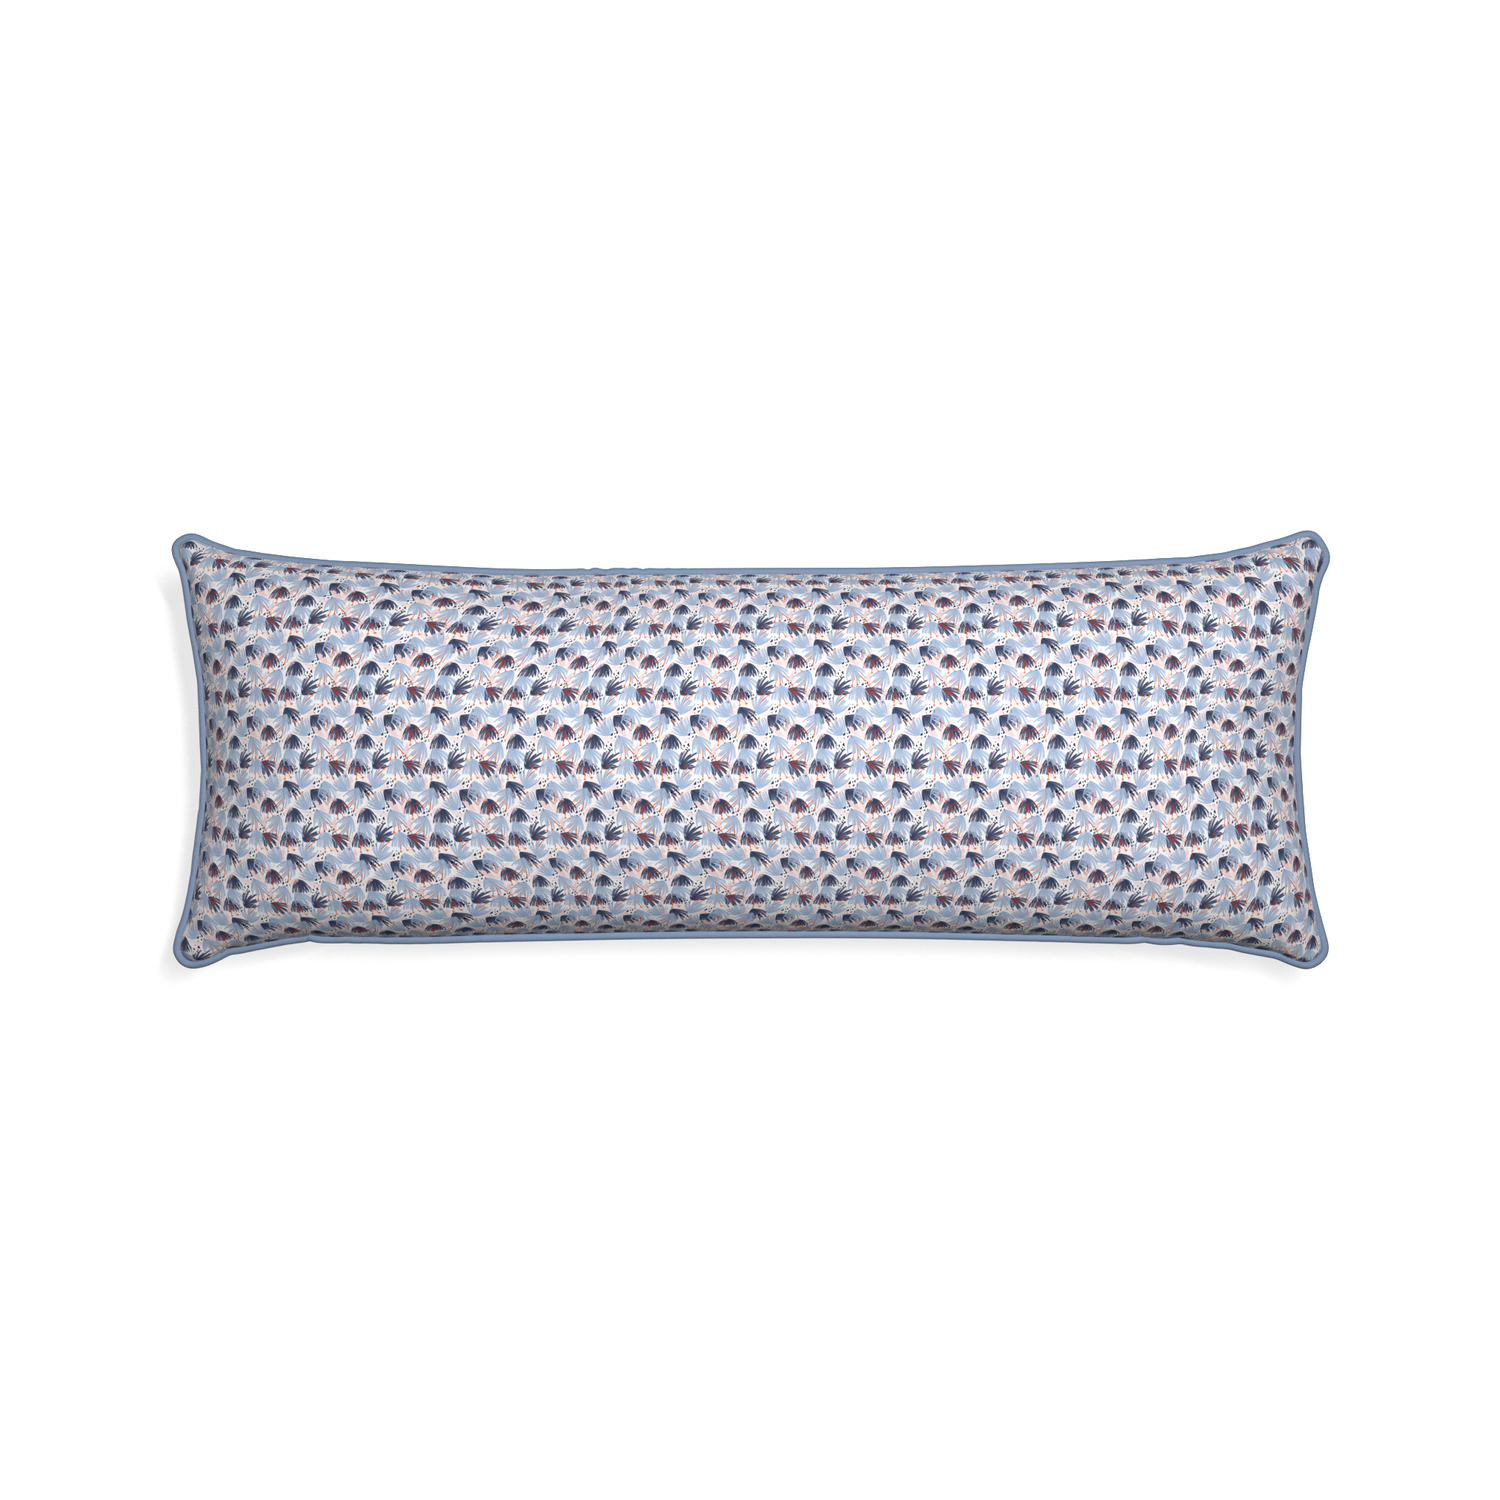 Xl-lumbar eden blue custom pillow with sky piping on white background